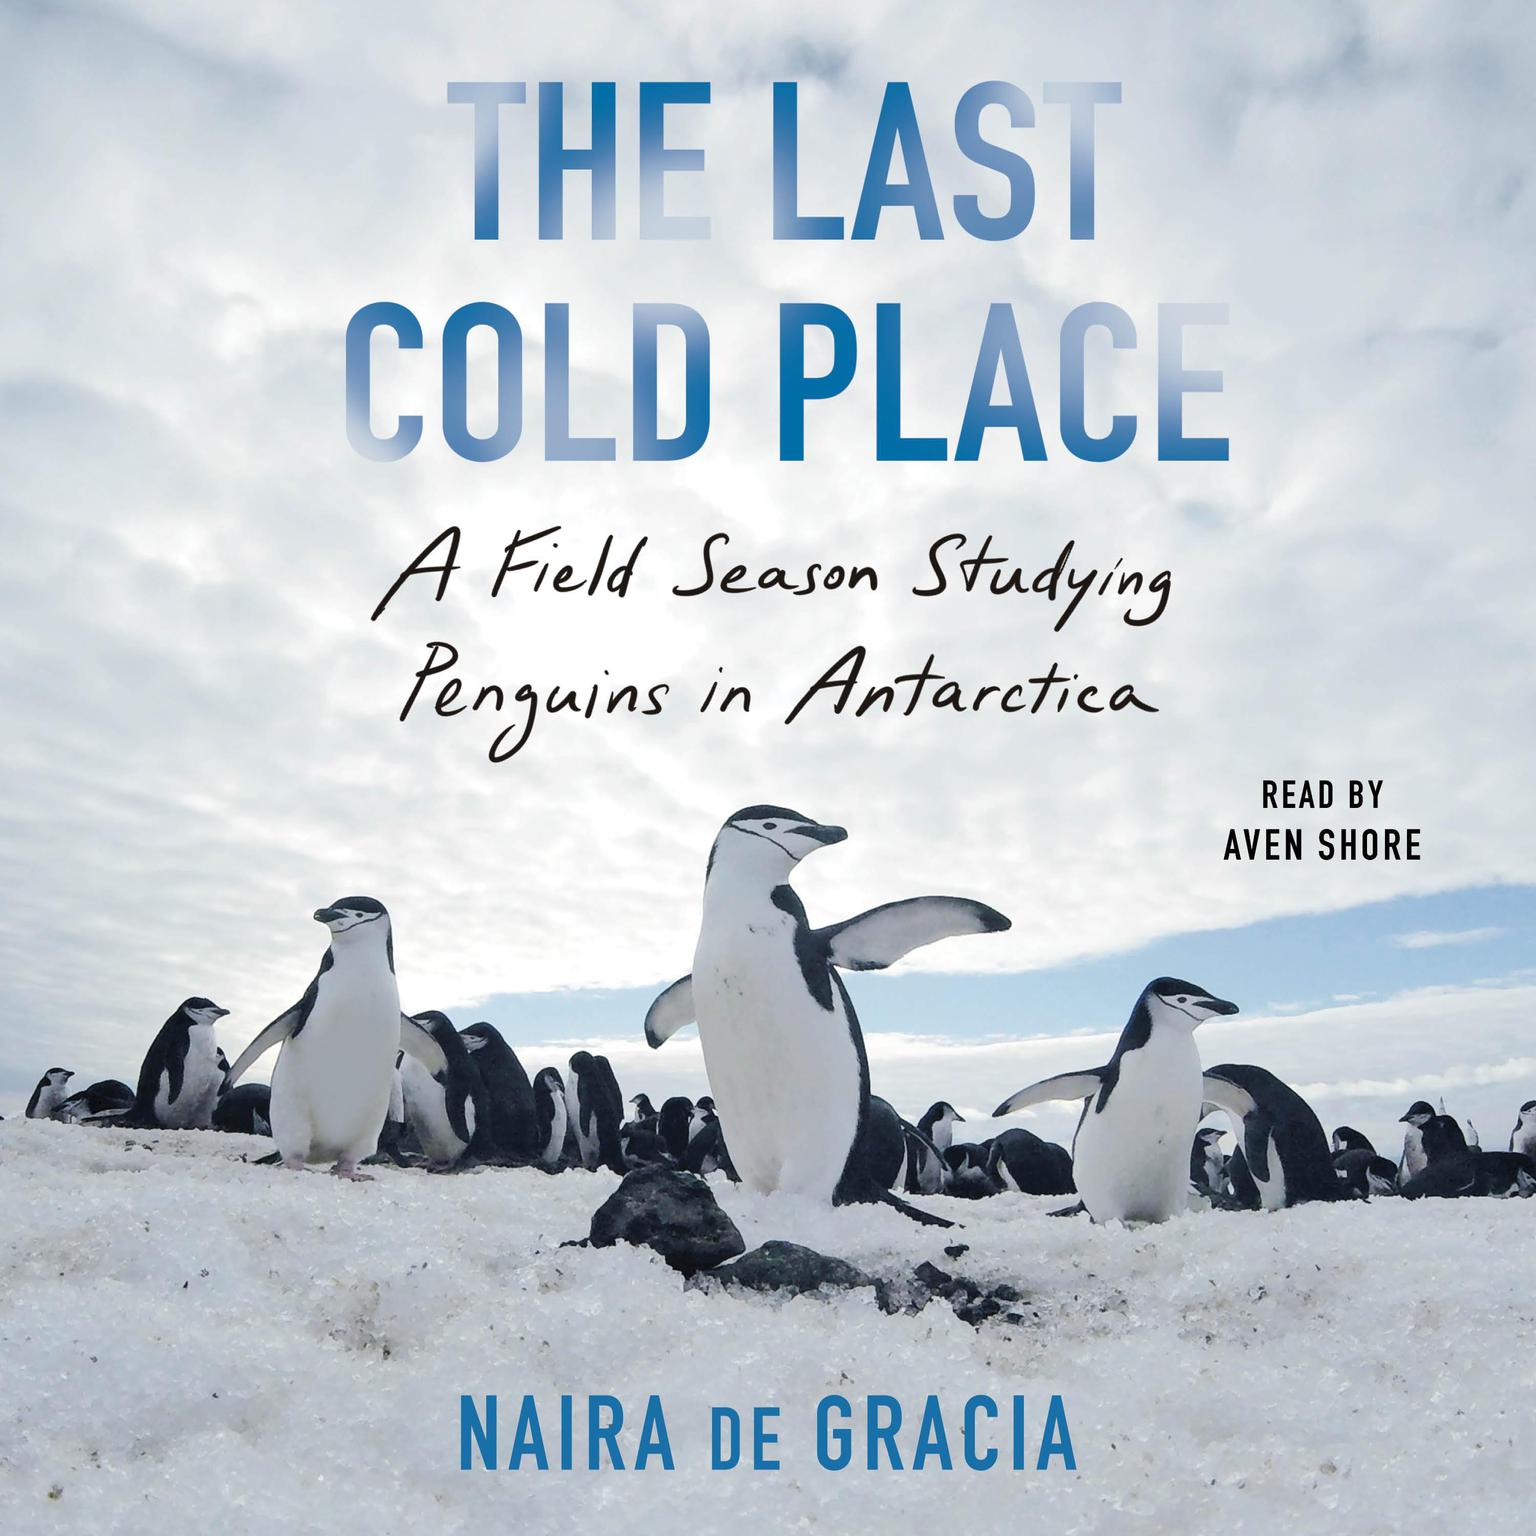 The Last Cold Place: A Field Season Studying Penguins in Antarctica Audiobook, by Naira de Gracia